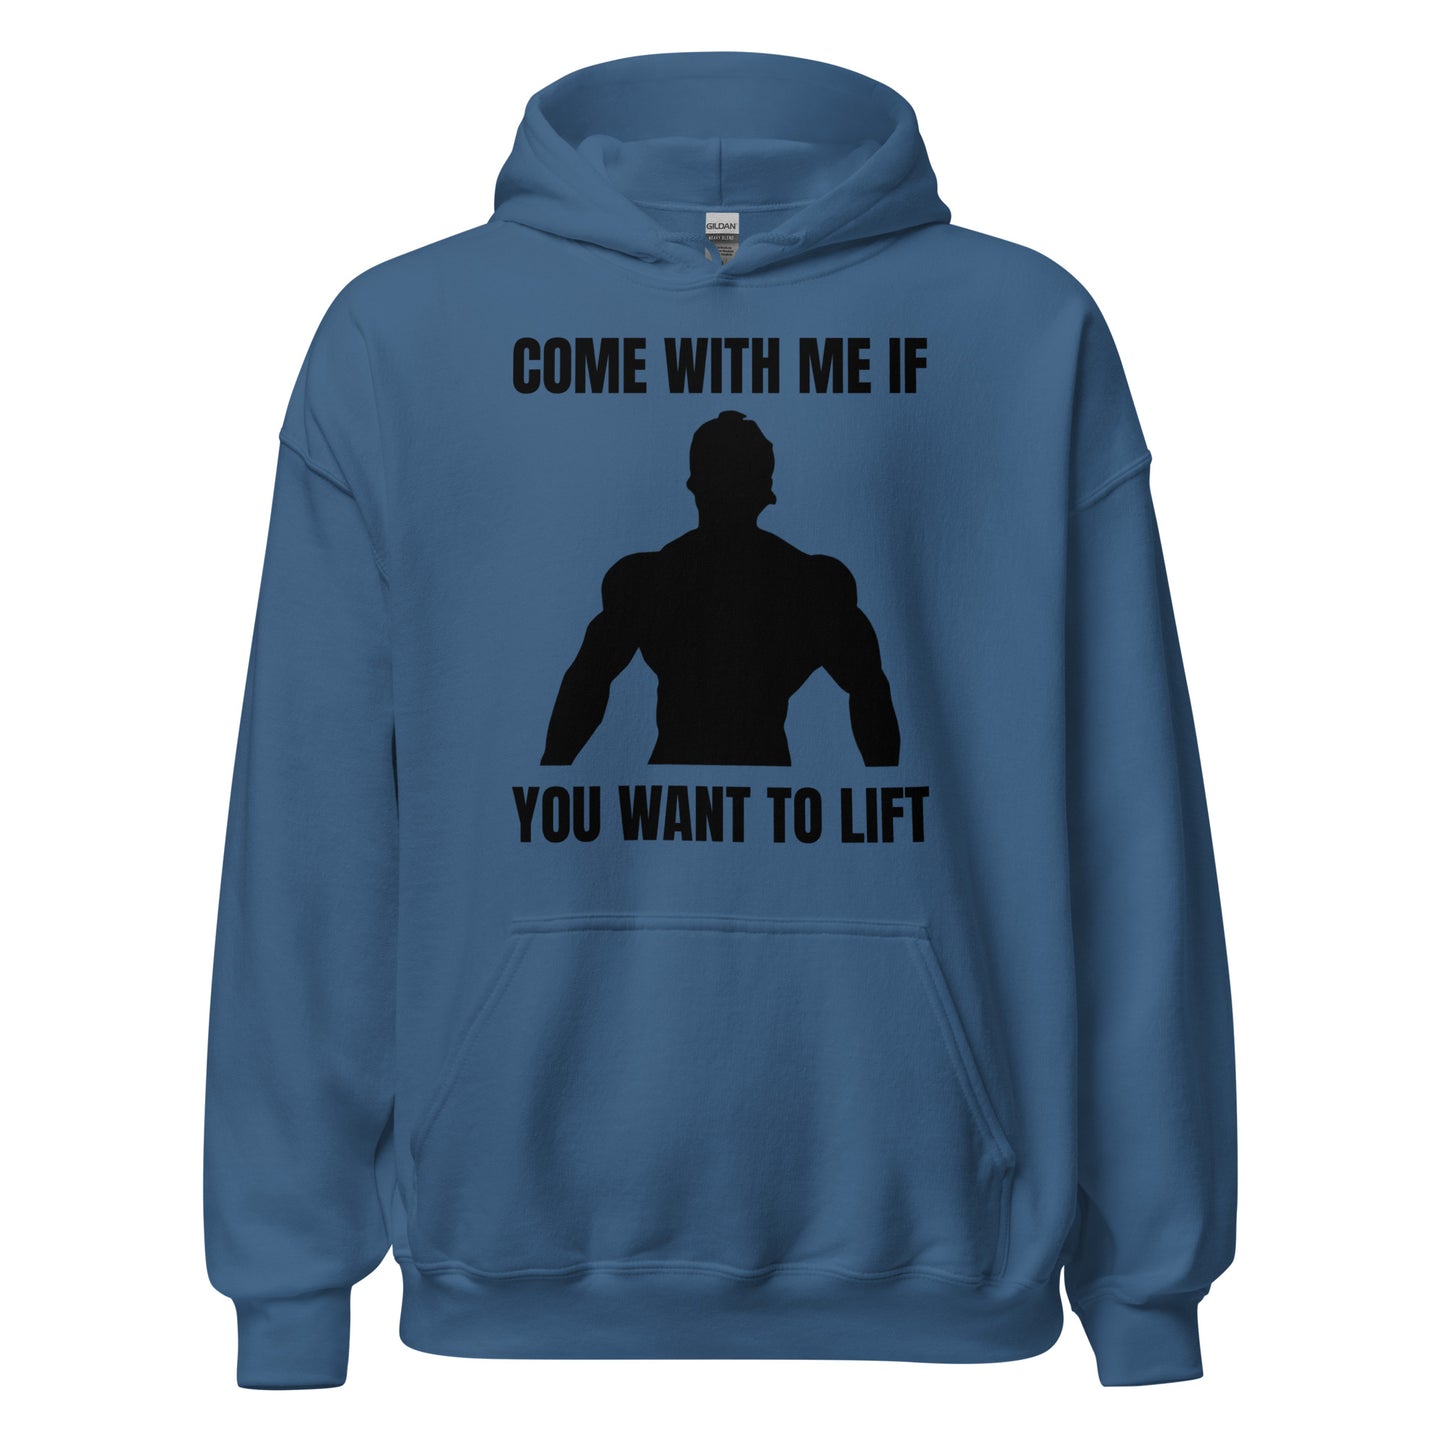 Come with Me if You Want to Lift Hoodie in Indigo Blue